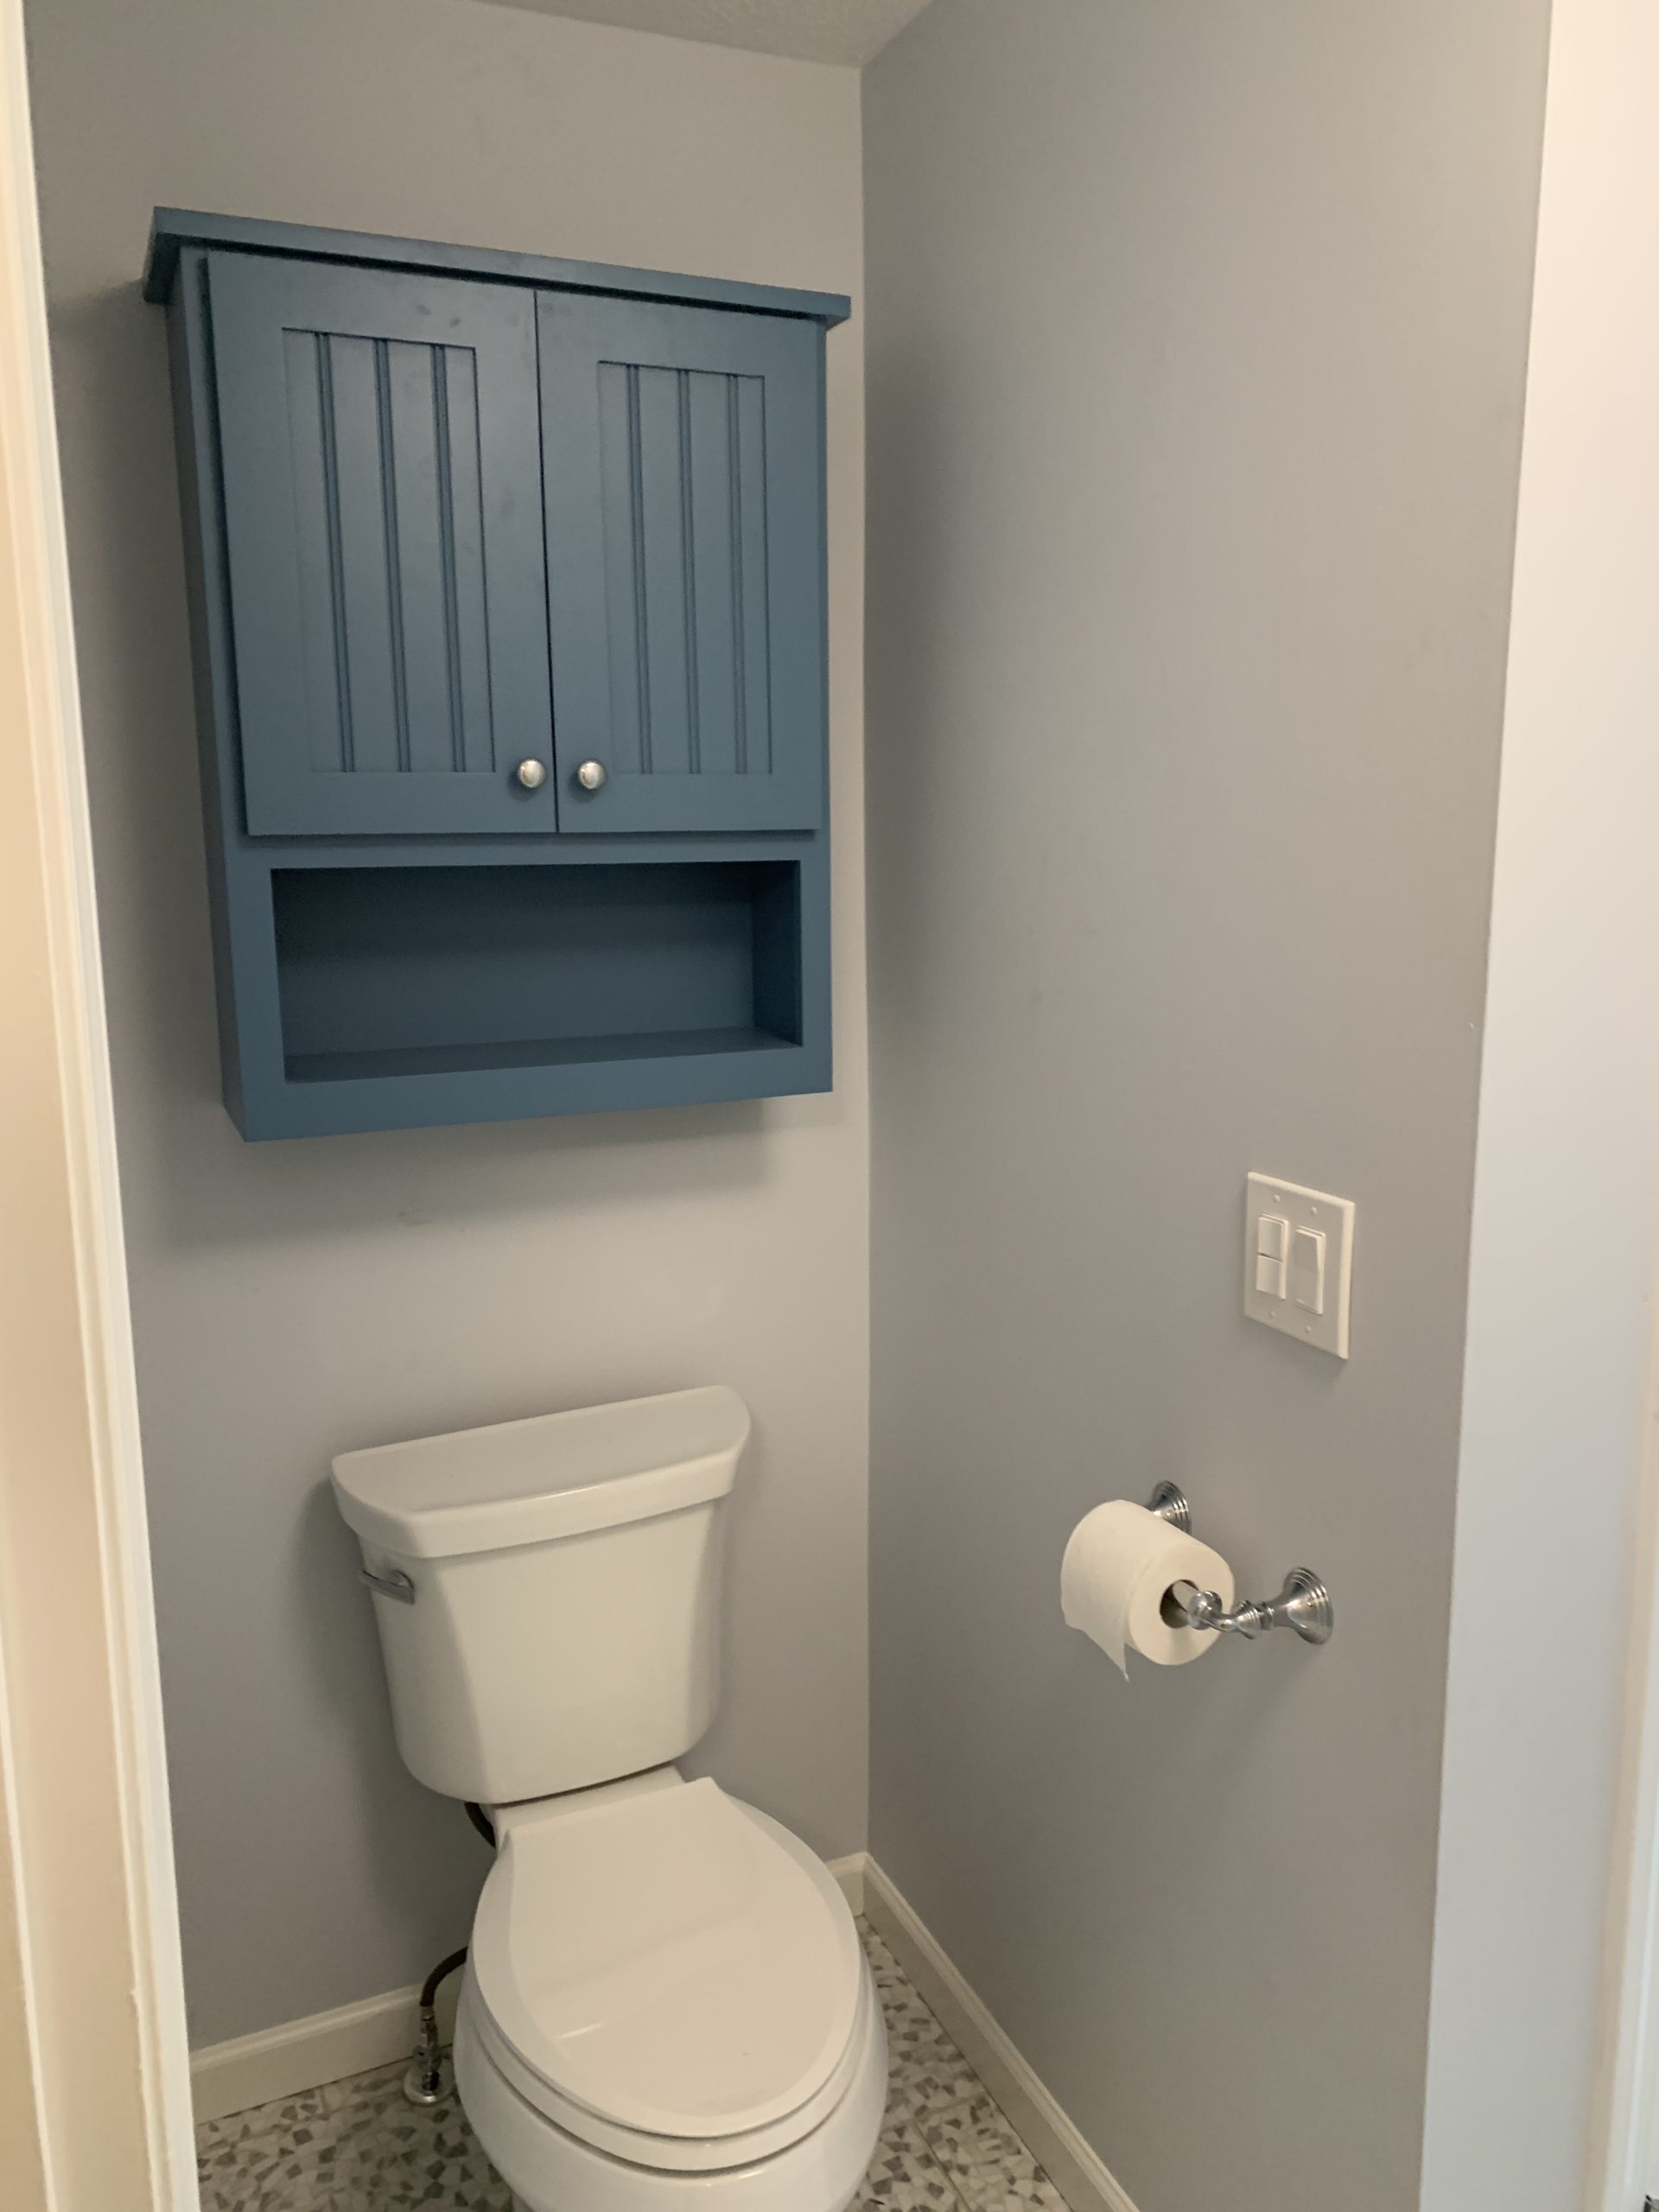 Cabinet over Toilet